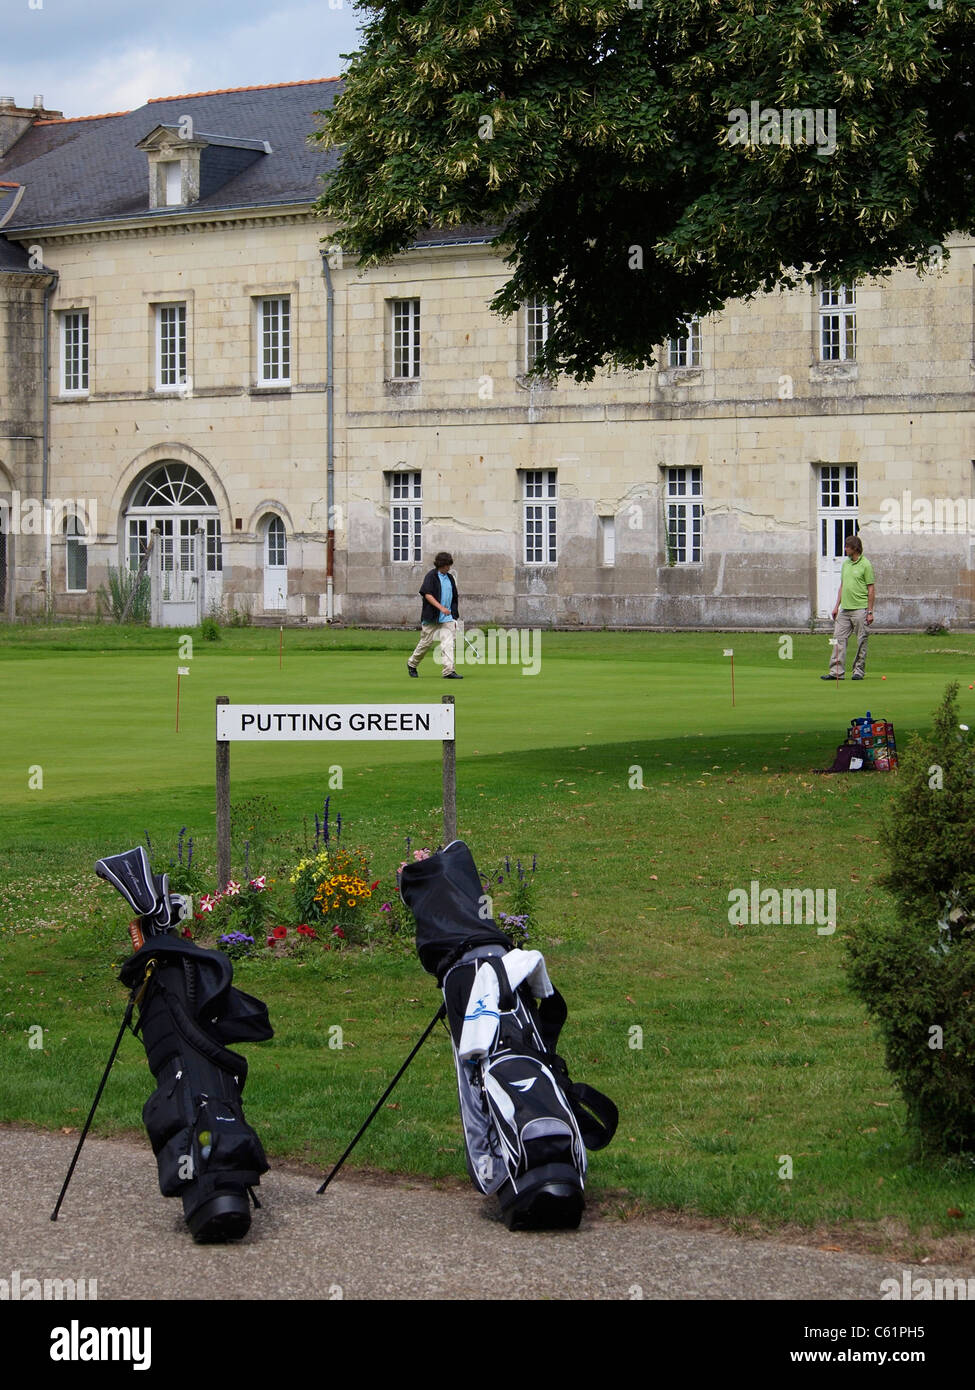 People practicing their golf puts at the putting green of Domaine saint Hilaire resort Stock Photo